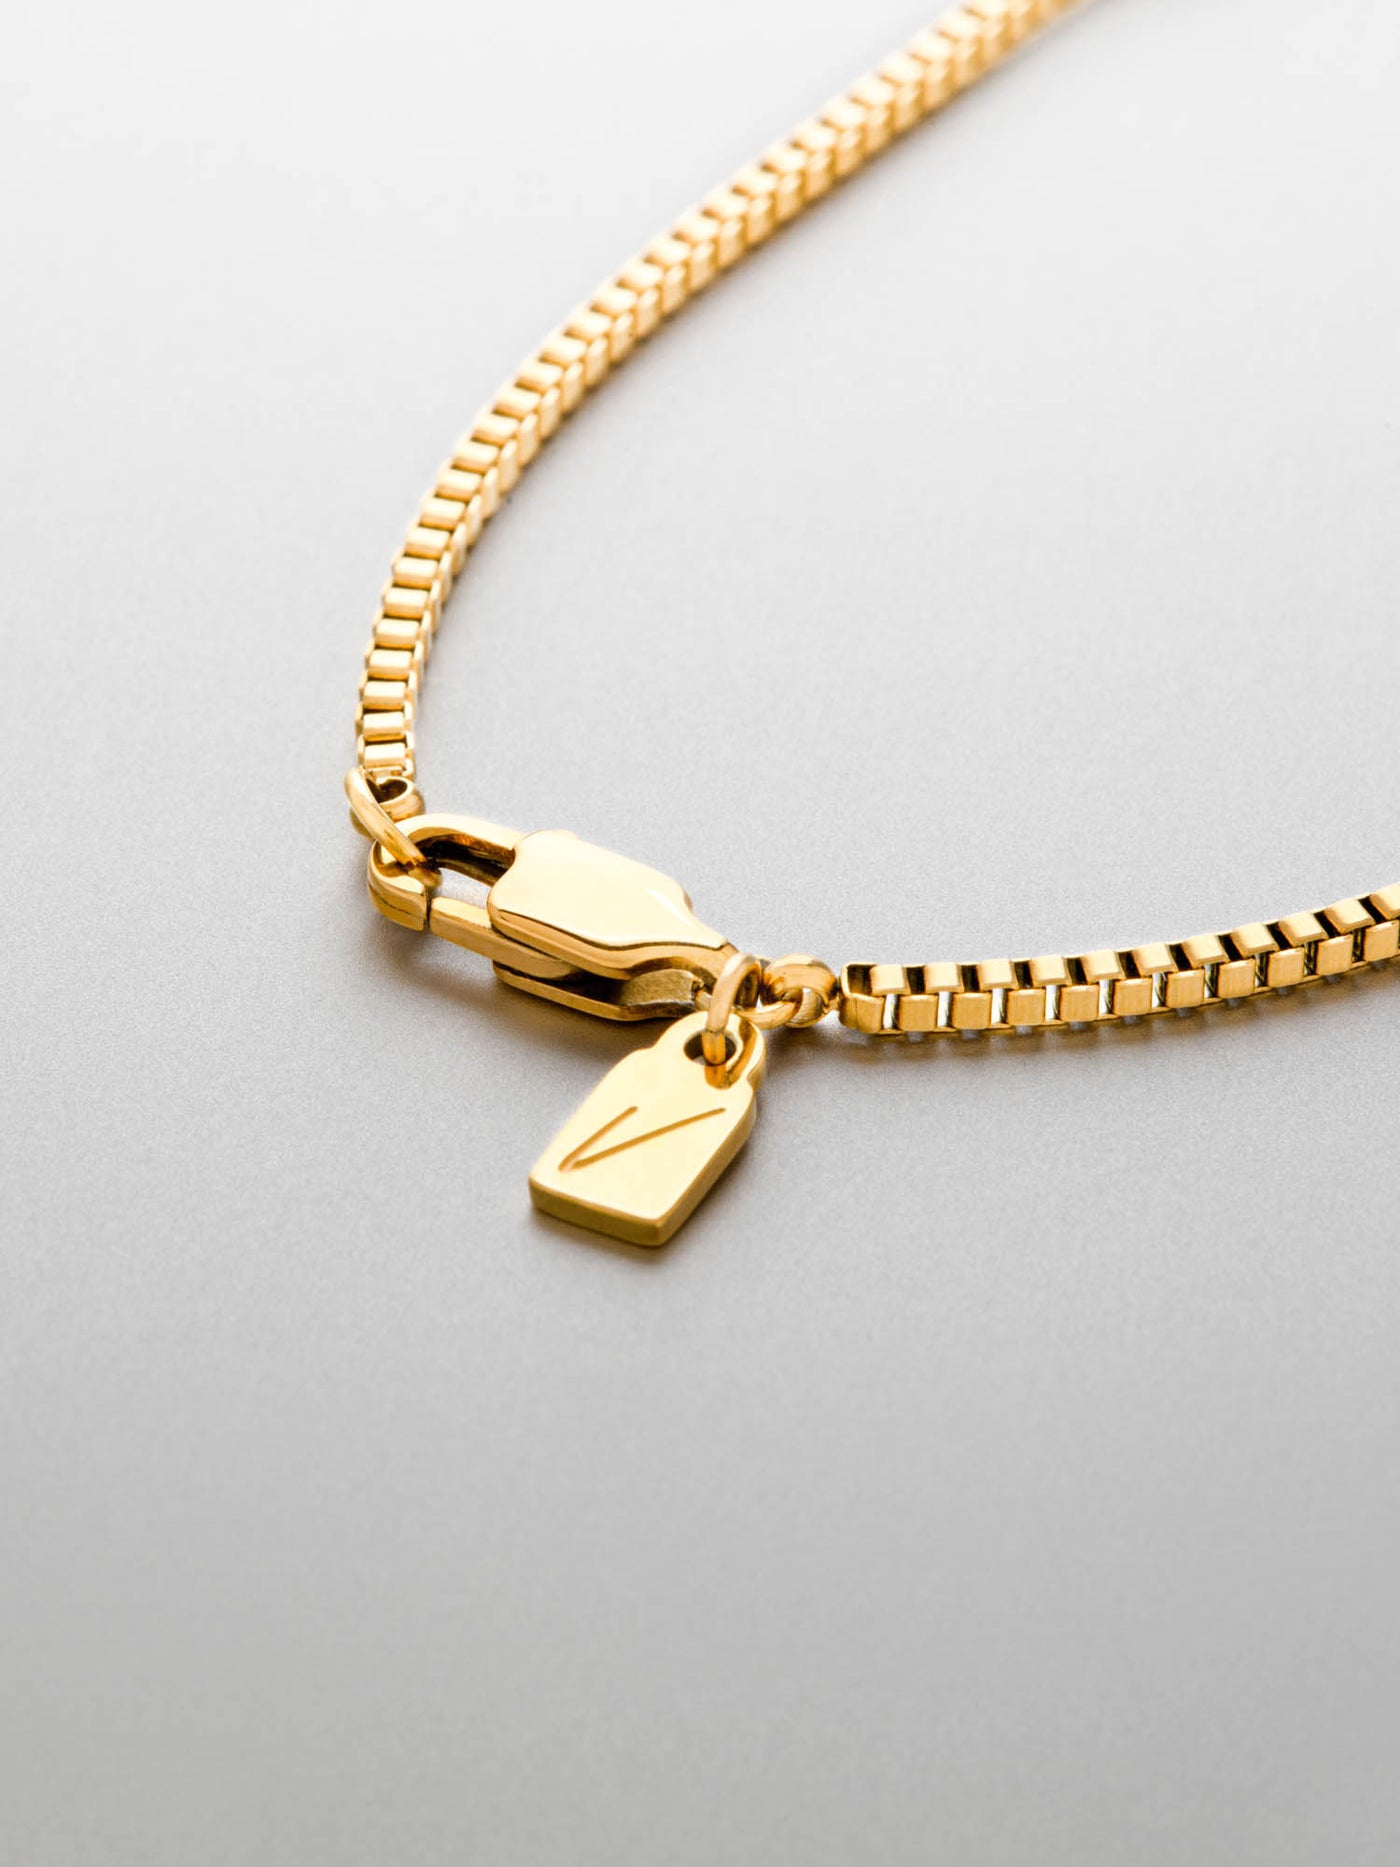 MEN- ROUNDED BOX CHAIN NECKLACE - The Littl A$229.99 A$299.99 14k Yellow  Gold Gifts Men